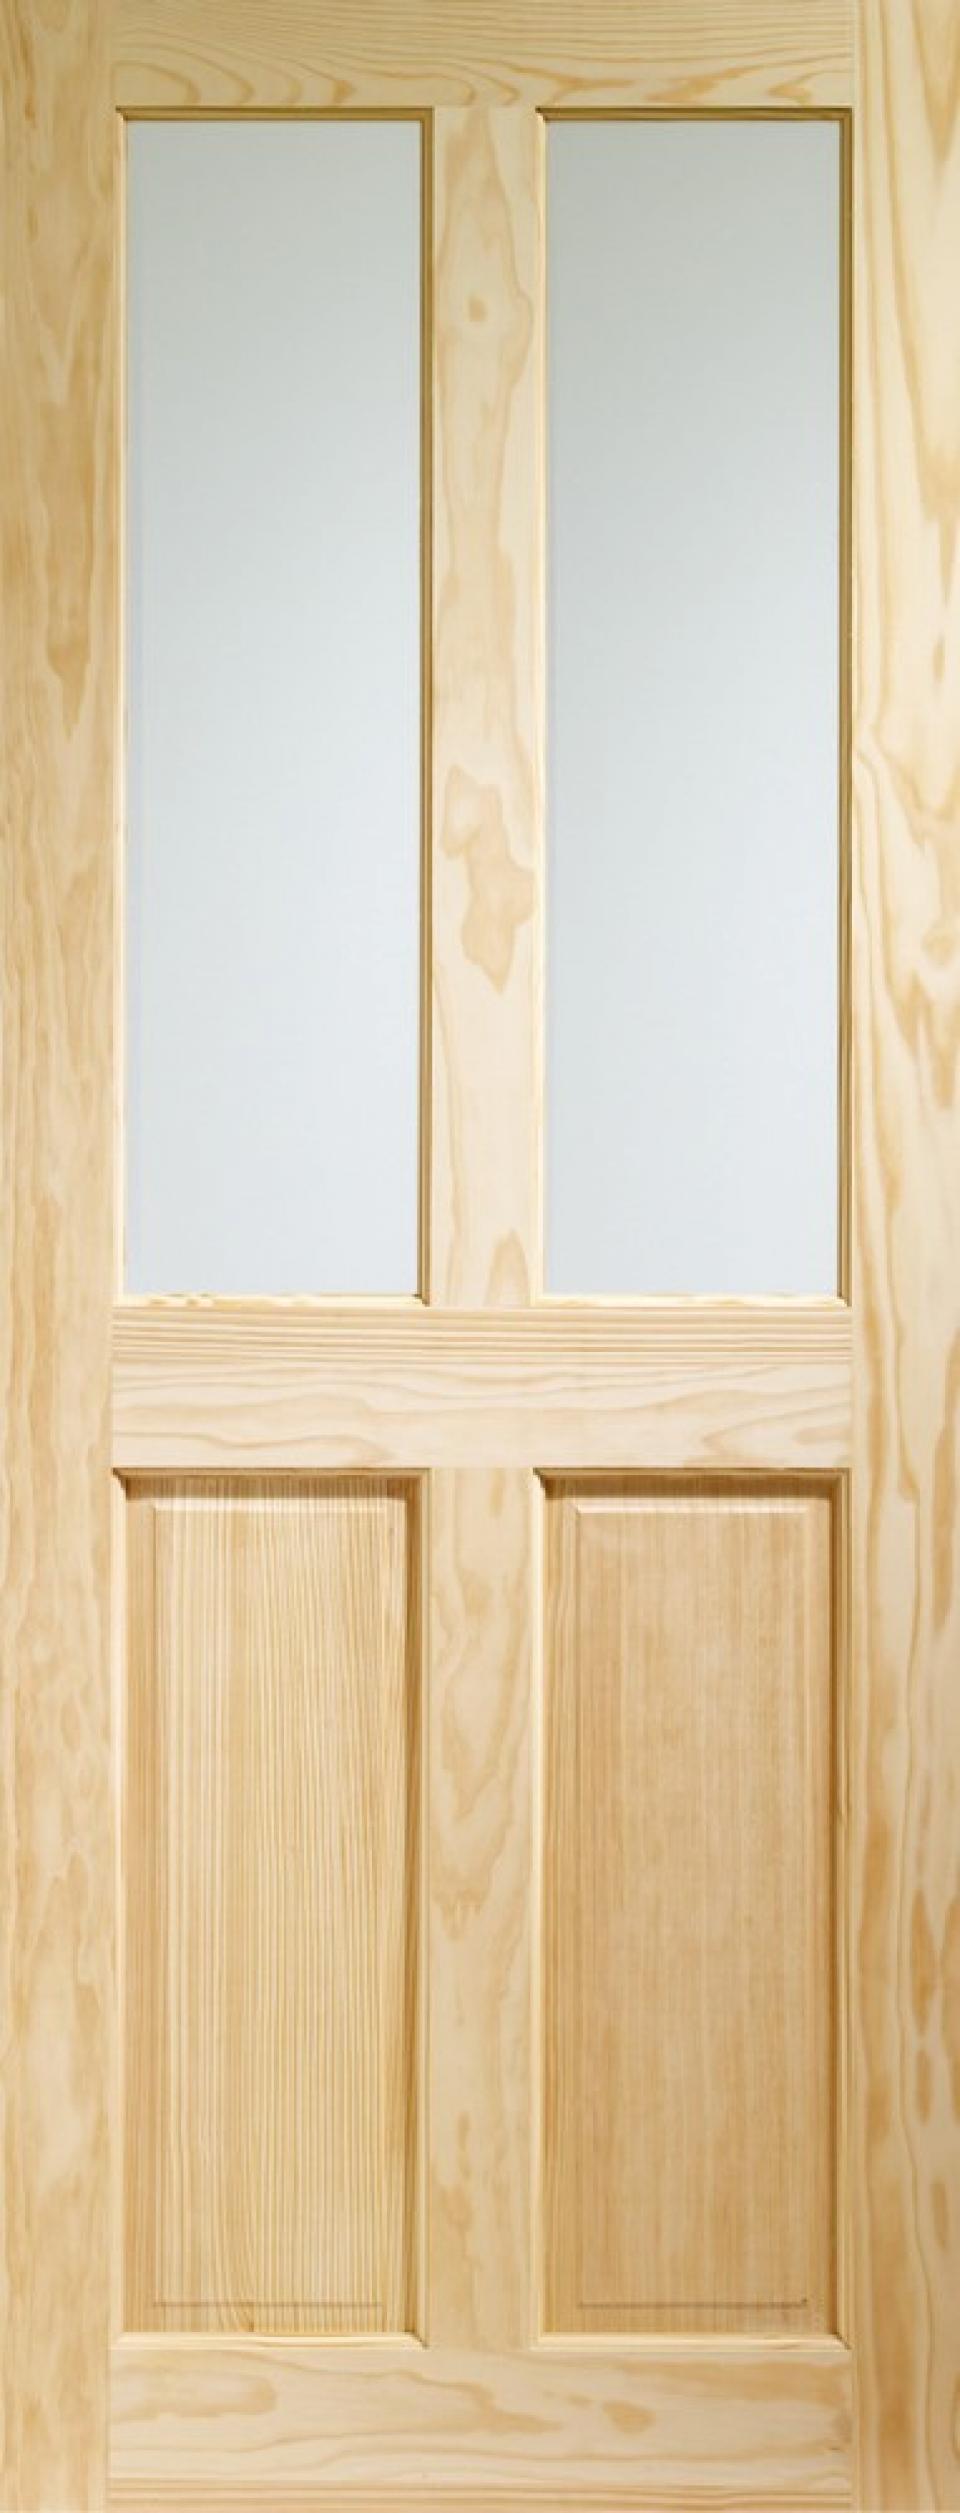 Clear Pine Vict Clear Glass 2032 x 813 x 35mm (32)